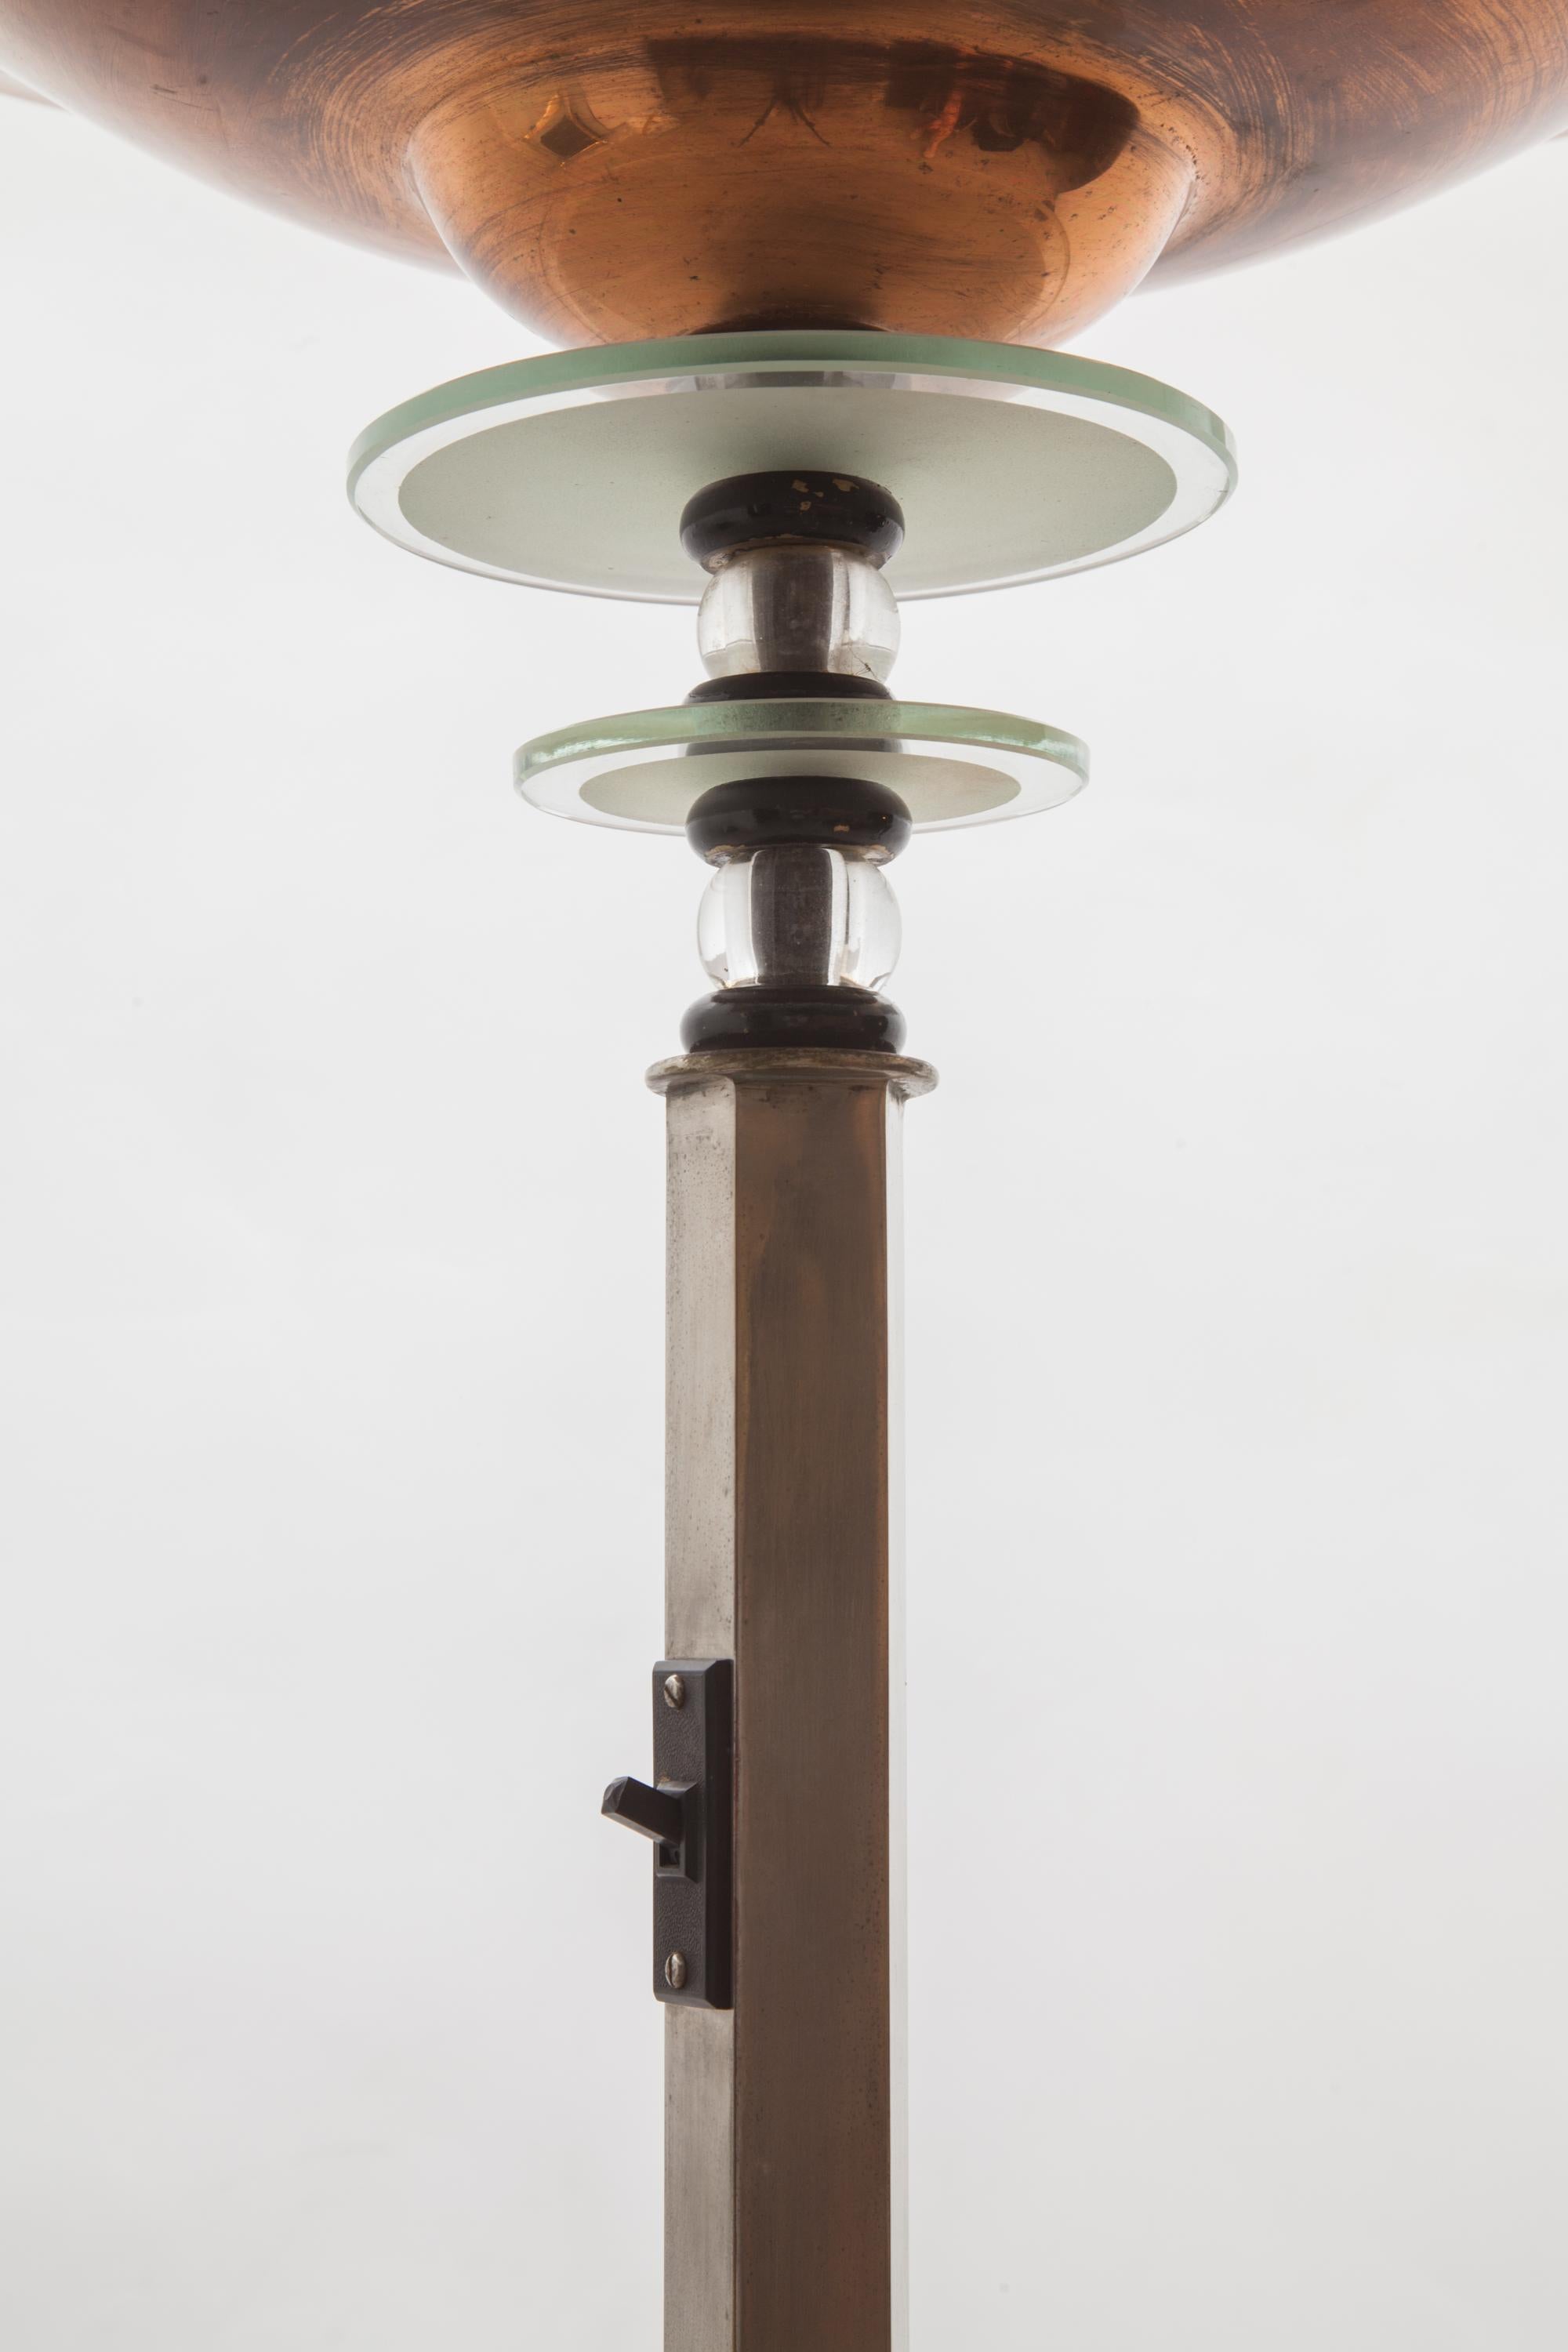 This Classic French Art Deco torchiere is from the 1920s.The brass base is connected to a hexagonal stem in nickel rice on to wear the brass shade and shine the light upwards with a suspension of two faceted and etched glass rings and beads which